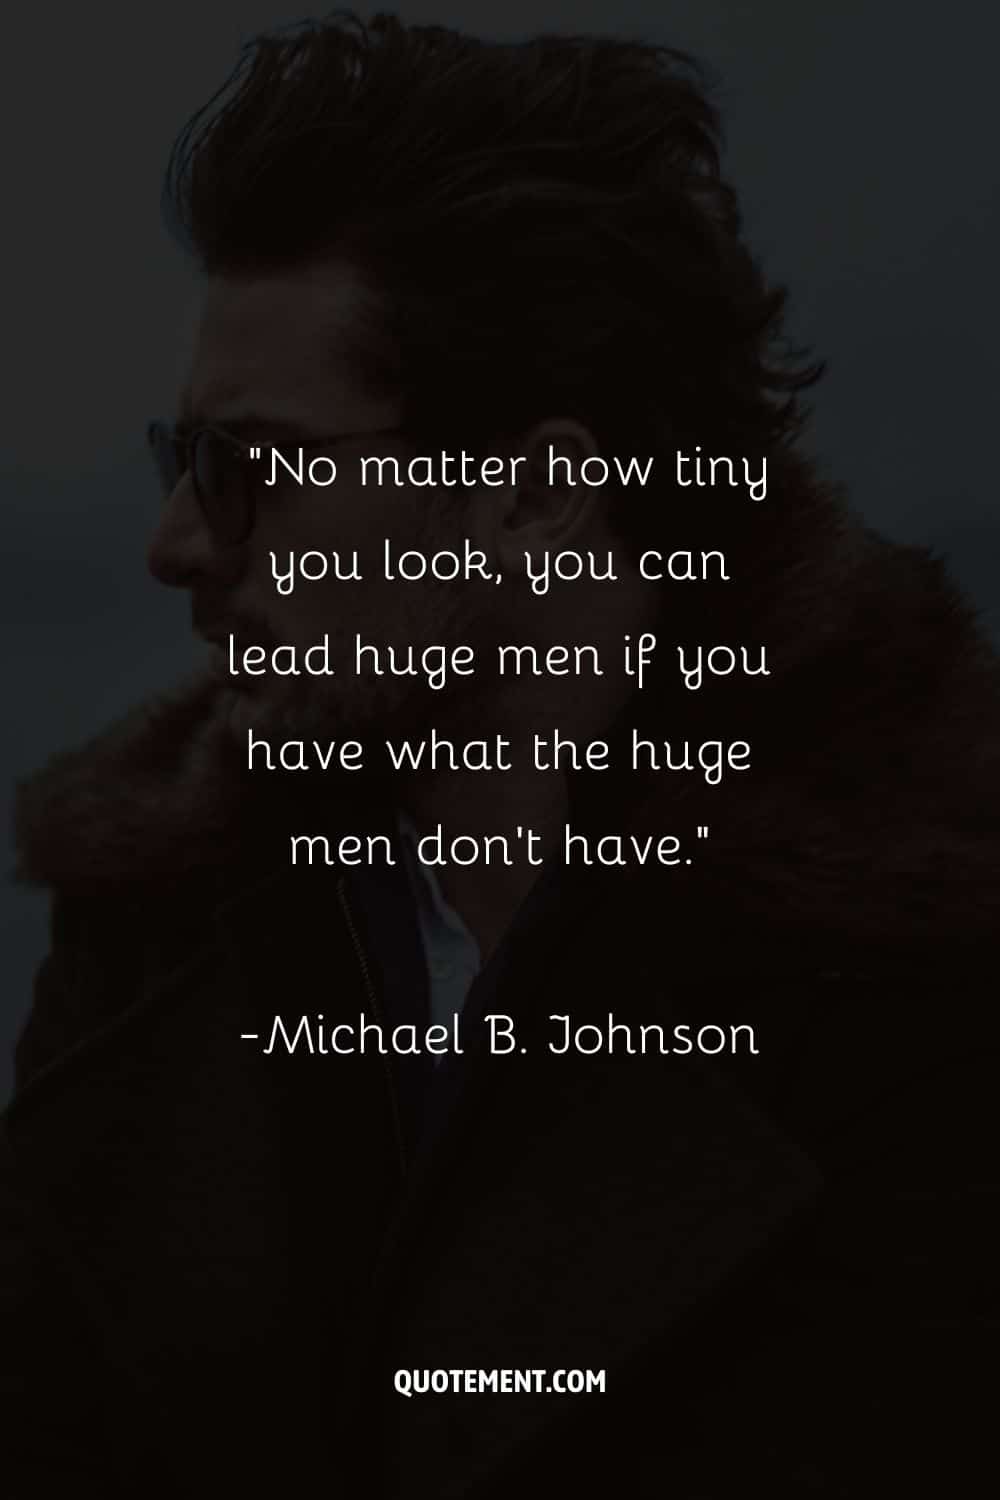 “No matter how tiny you look, you can lead huge men if you have what the huge men don't have.”